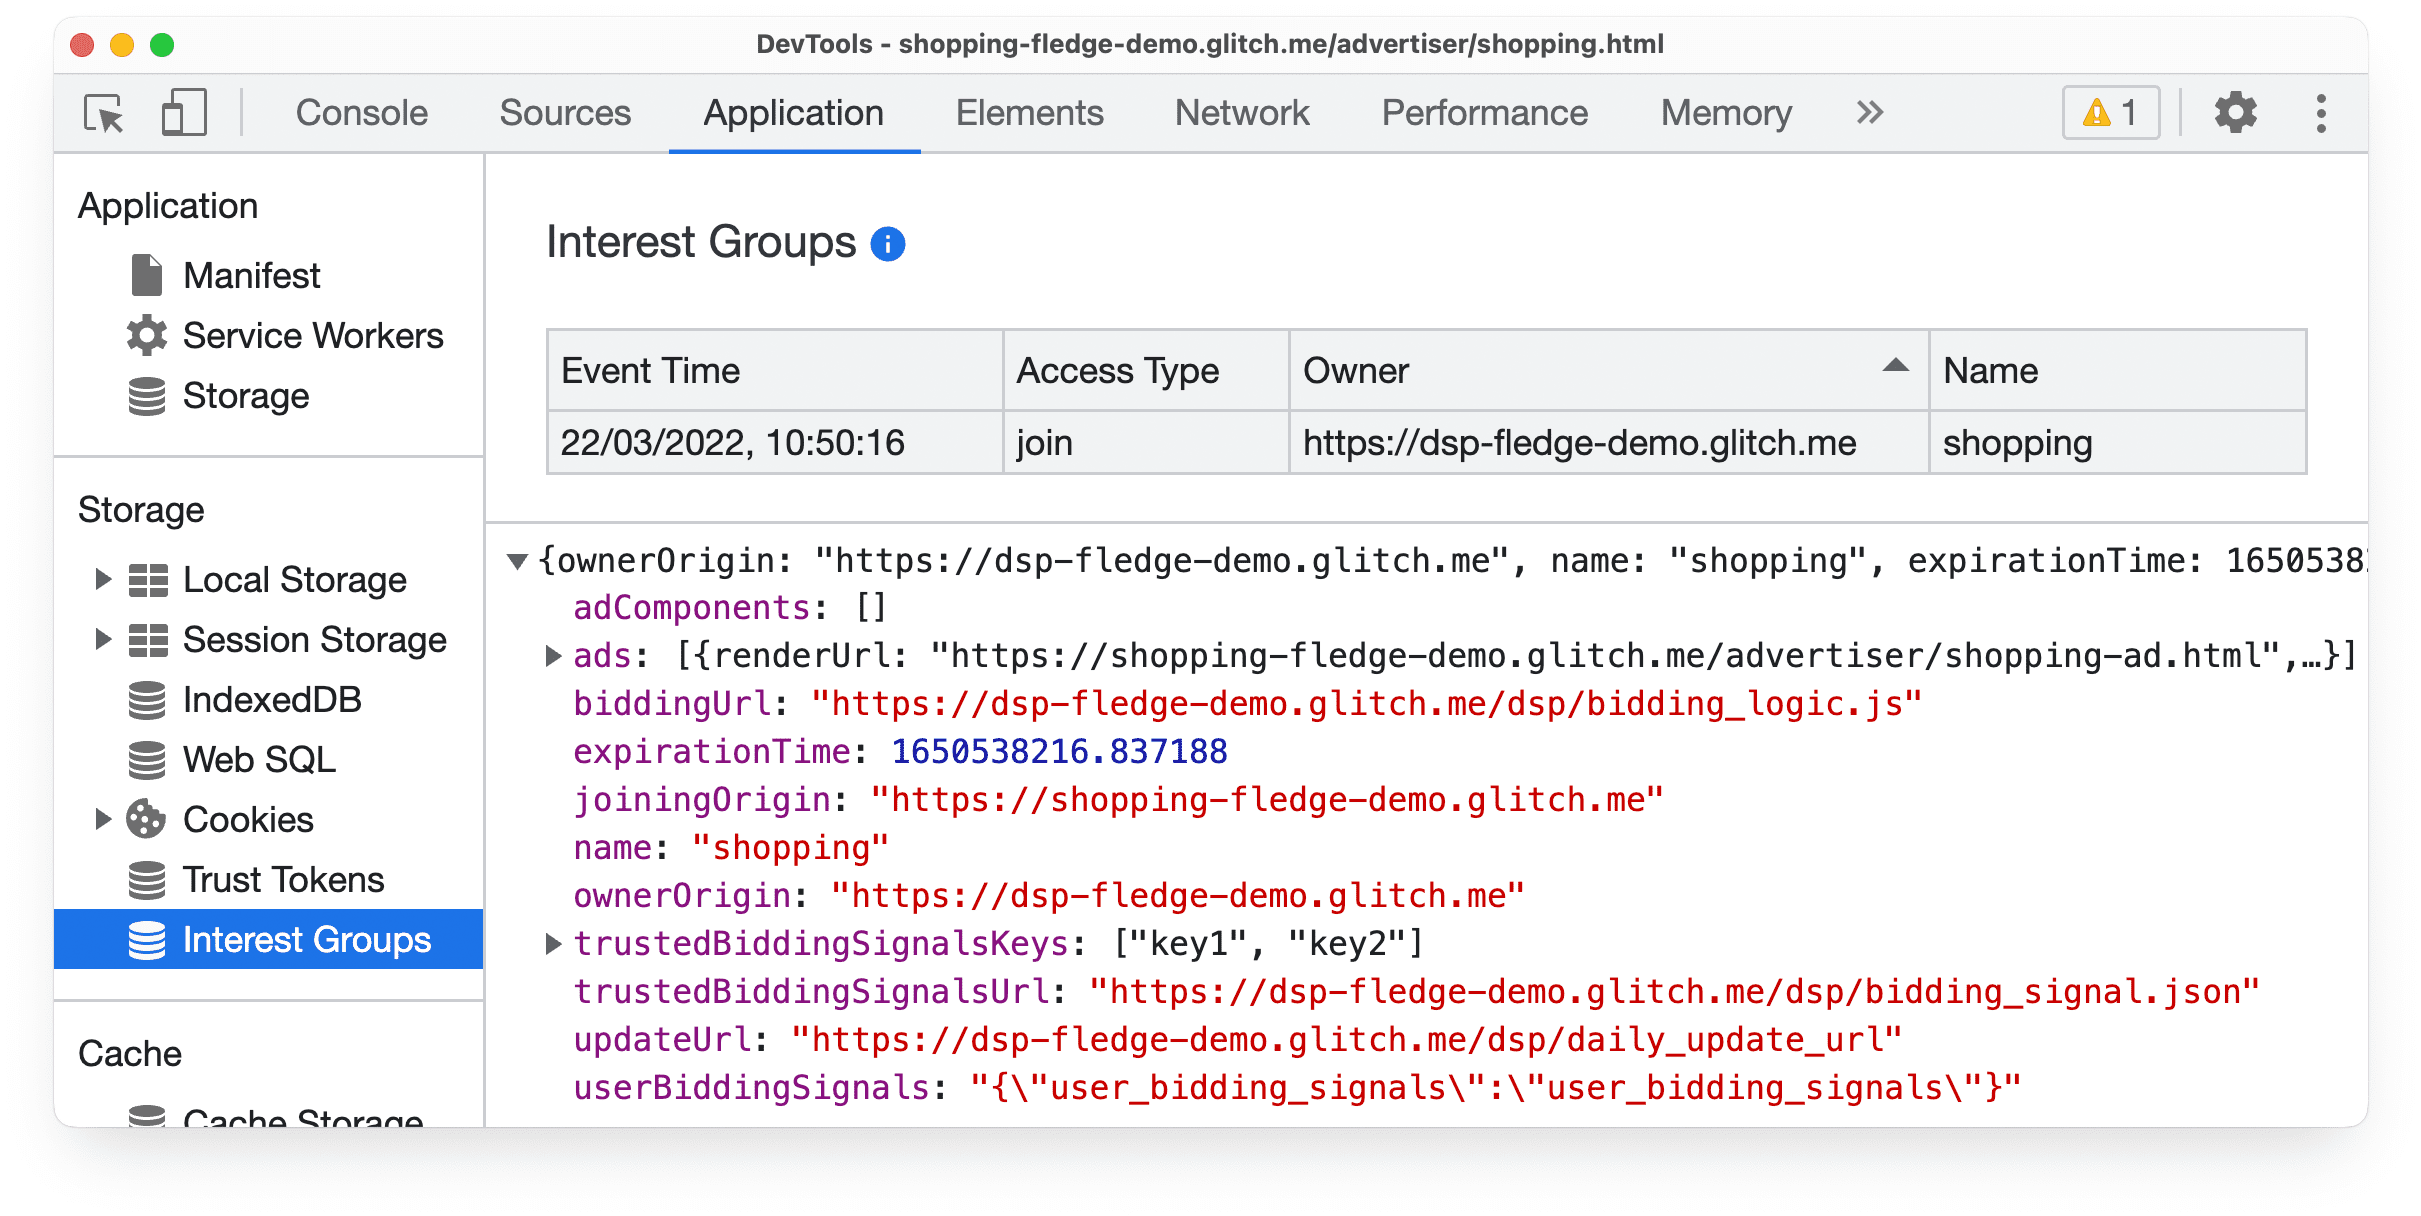 The DevTools Application panel displaying information about a Protected Audience API interest group join event.